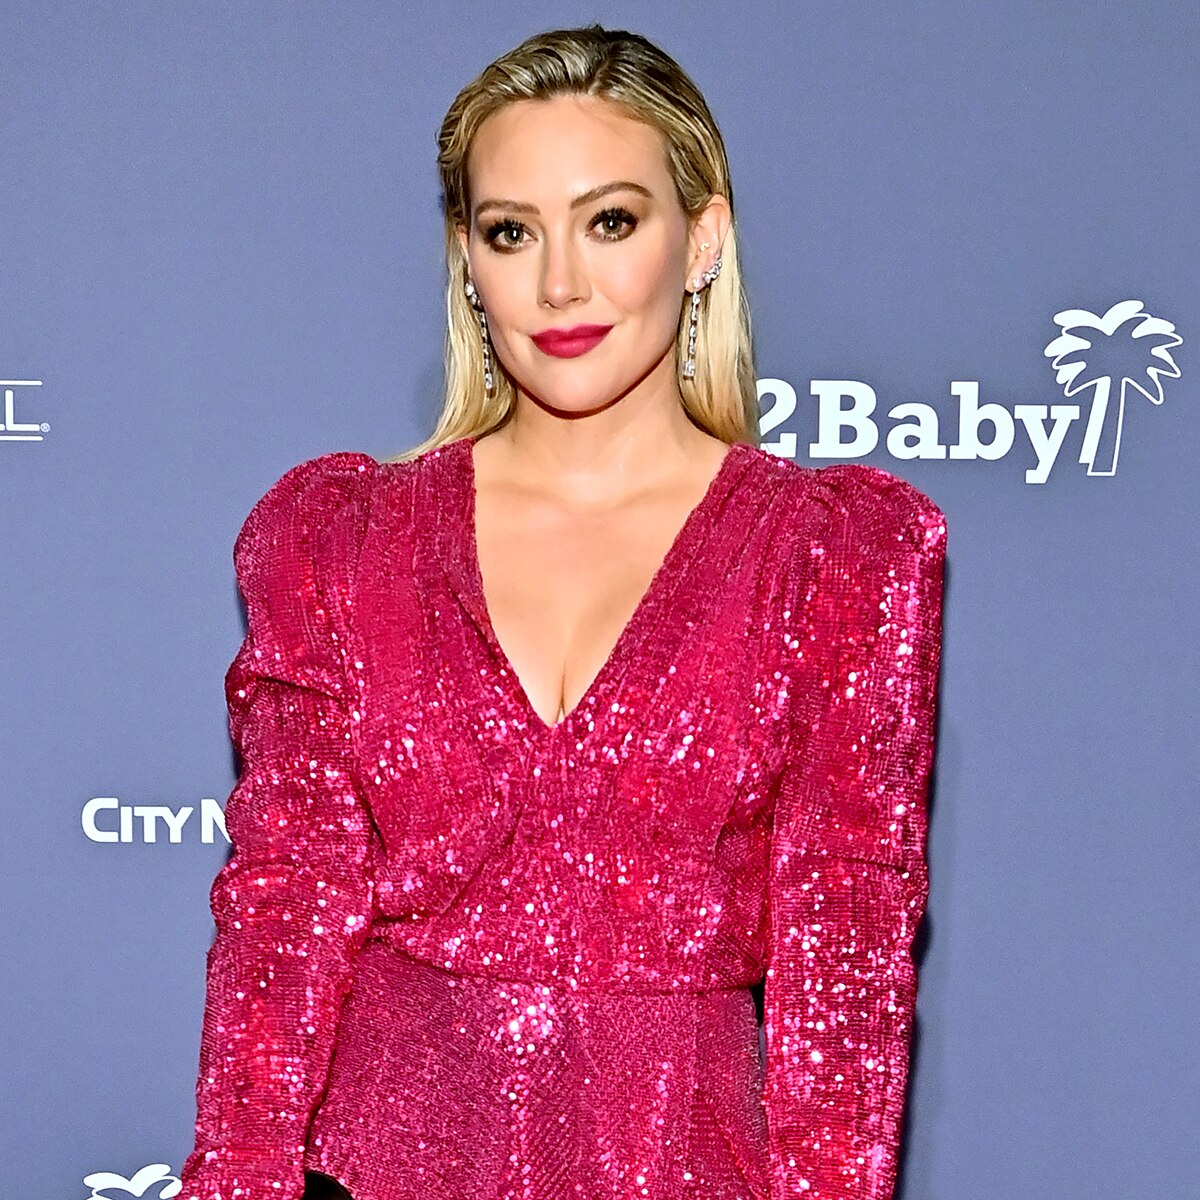 Stars Attend Baby2Baby Event, Hilary Duff